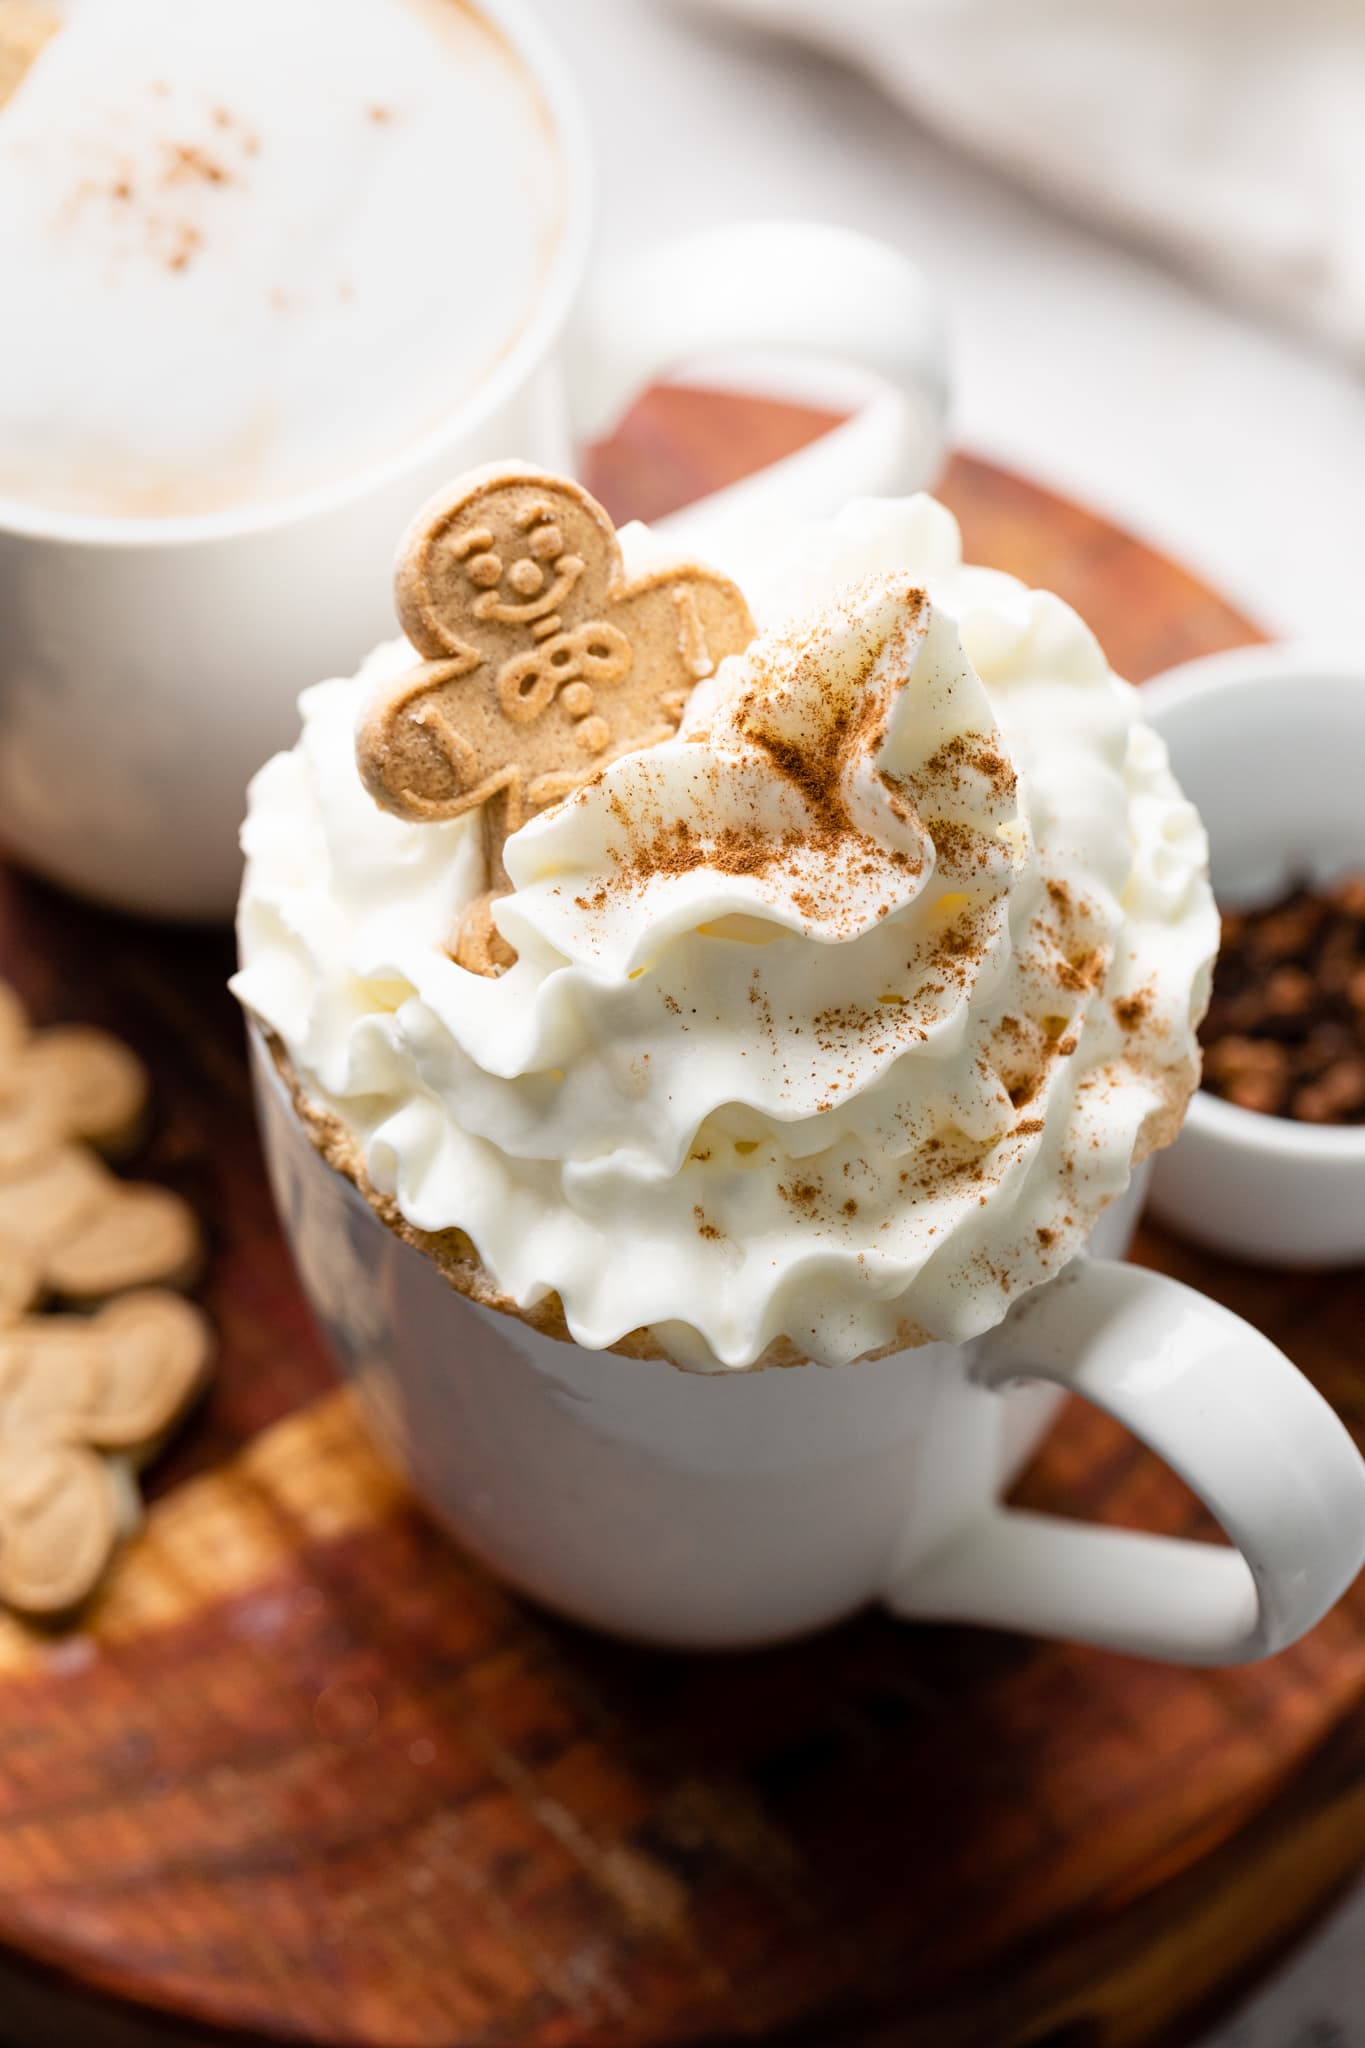 https://allthehealthythings.com/wp-content/uploads/2020/12/gingerbread-latte-5.jpg